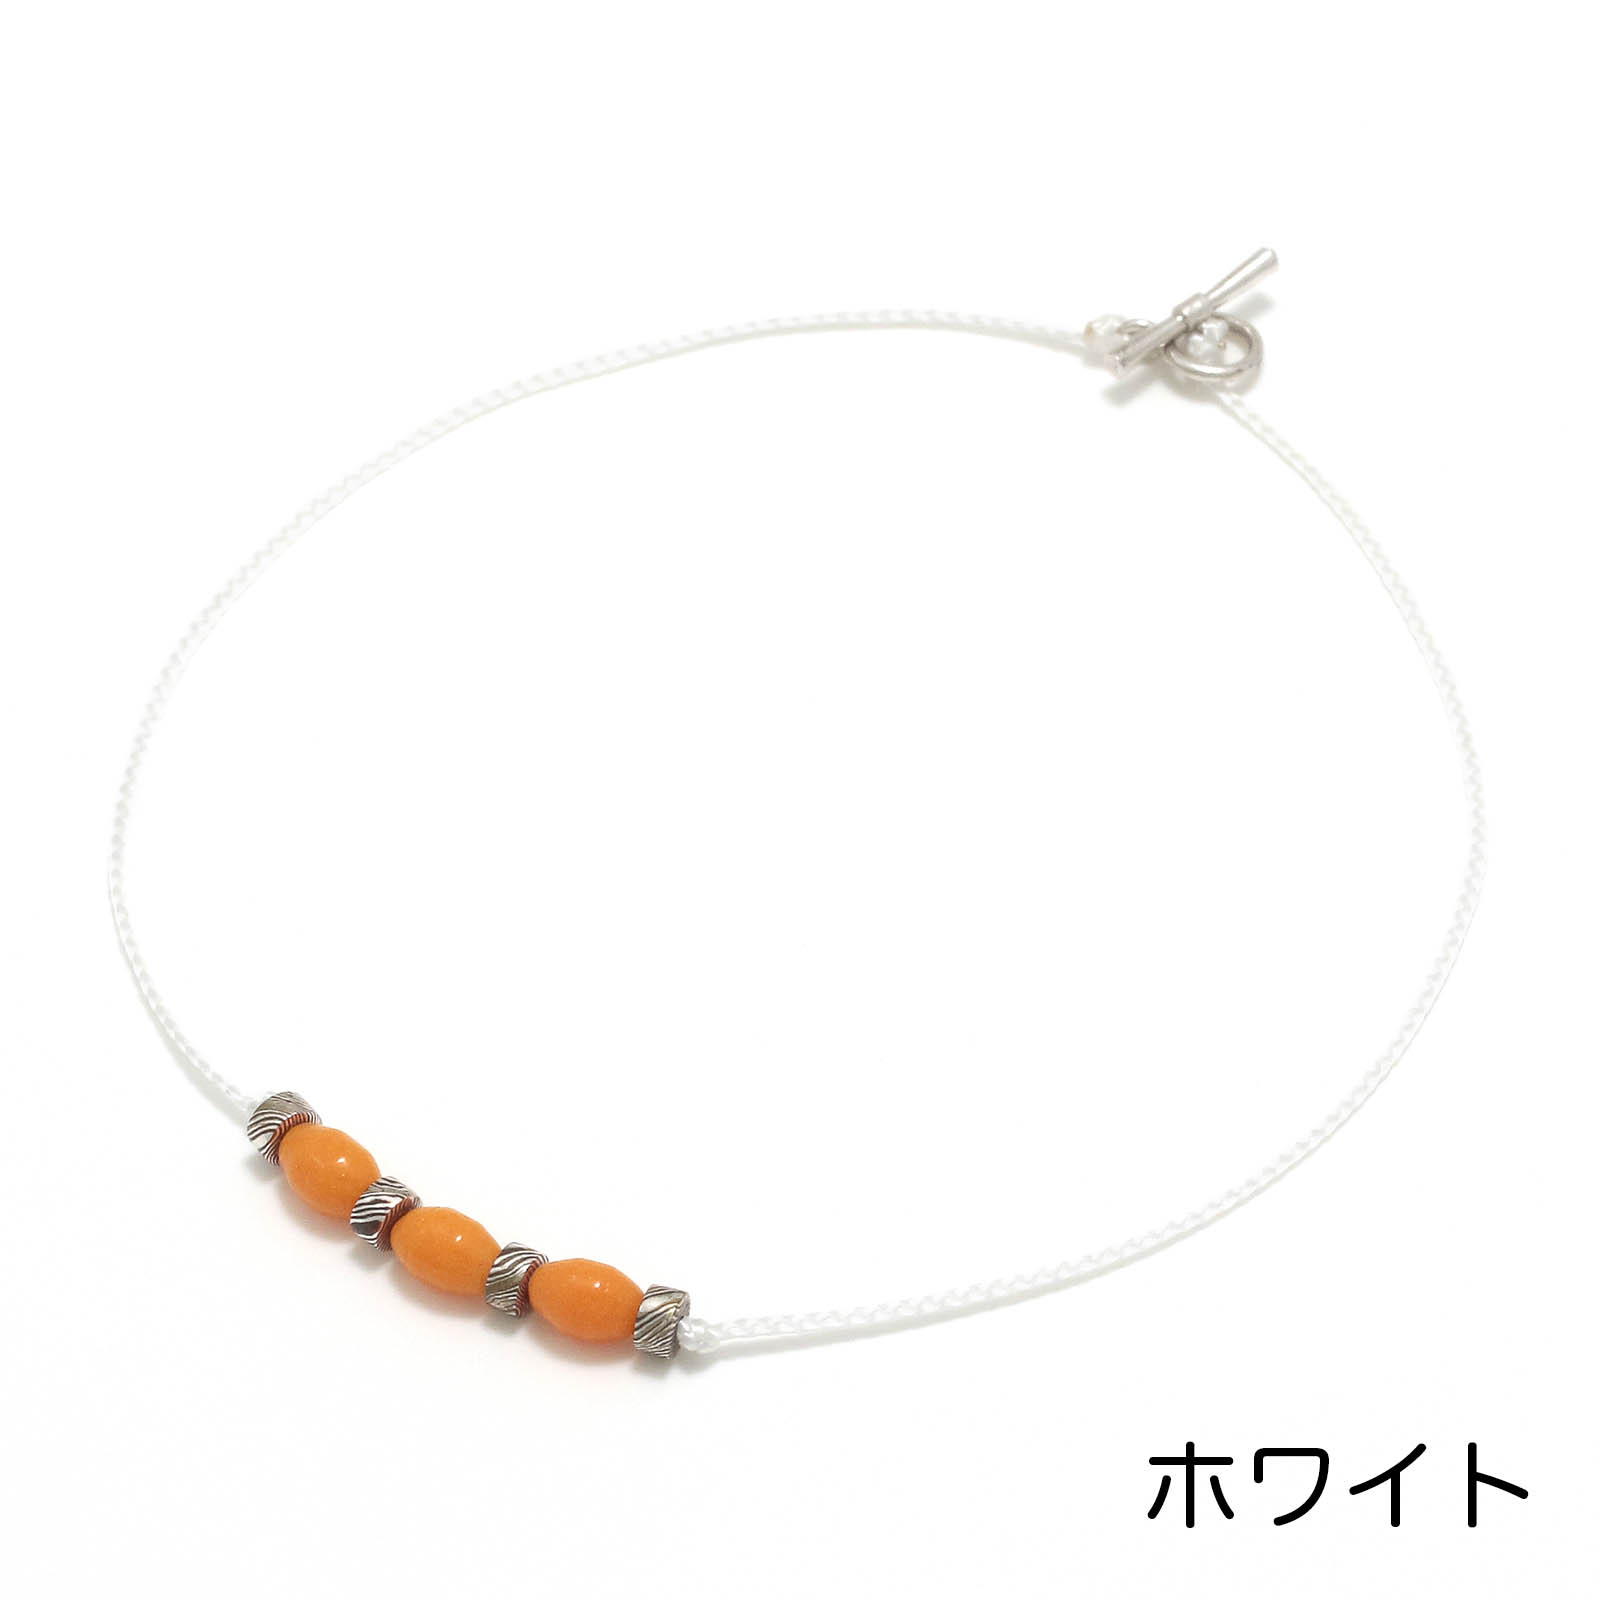 Collaboration One Mile Jewelry MOKUME Beads Anklet